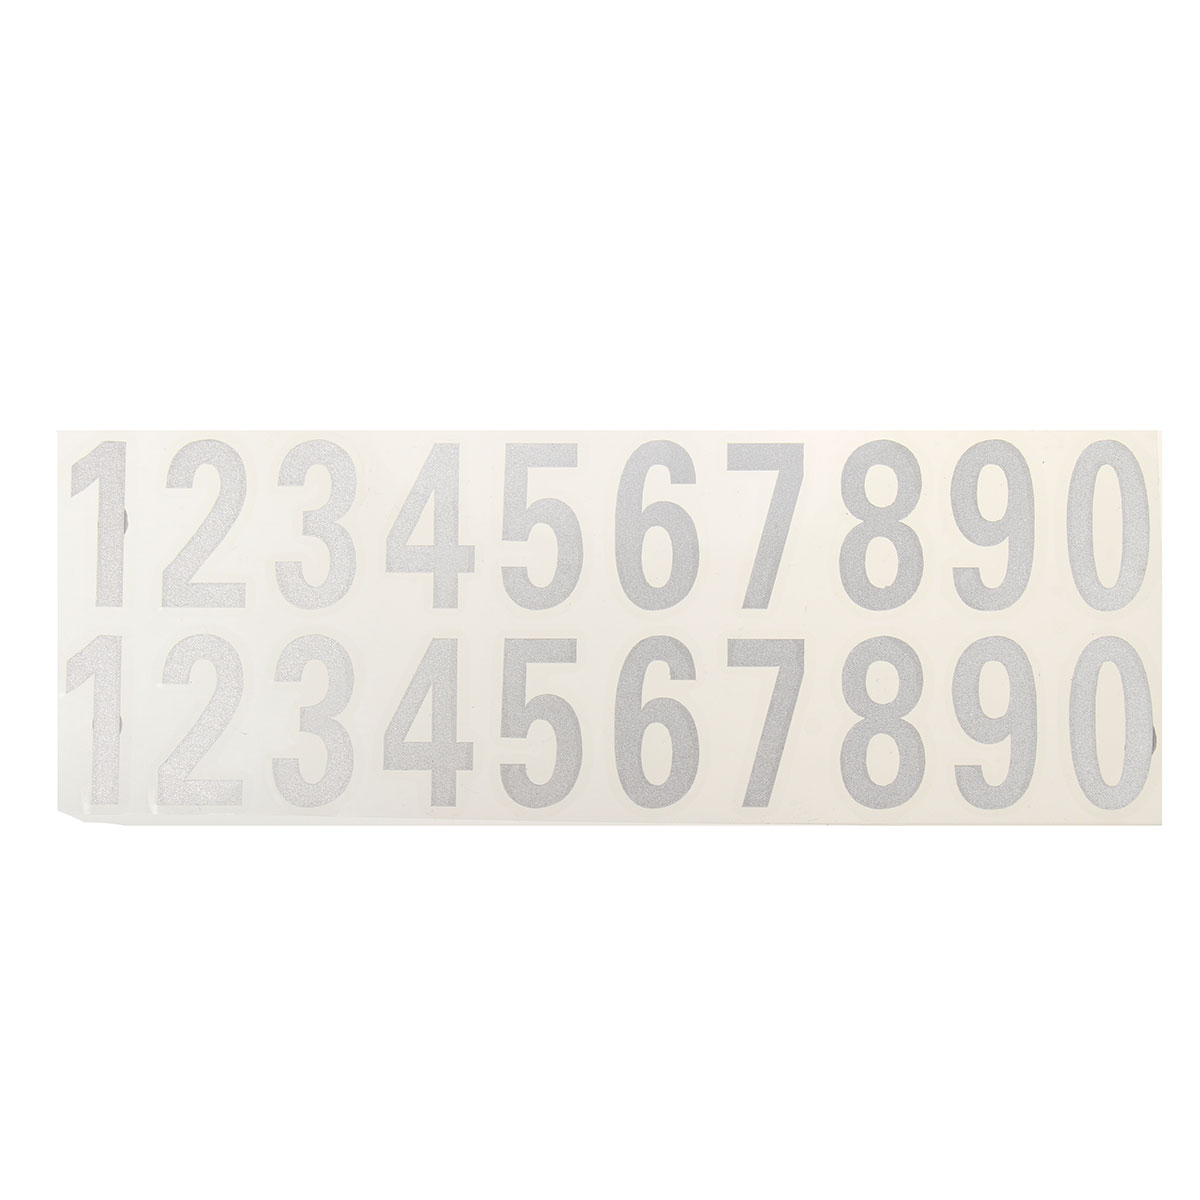 Number-Reflective-Sticker-Car-Vinyl-Decal-Street-Address-Mail-Box-Number-Stickers-White-Black-1088688